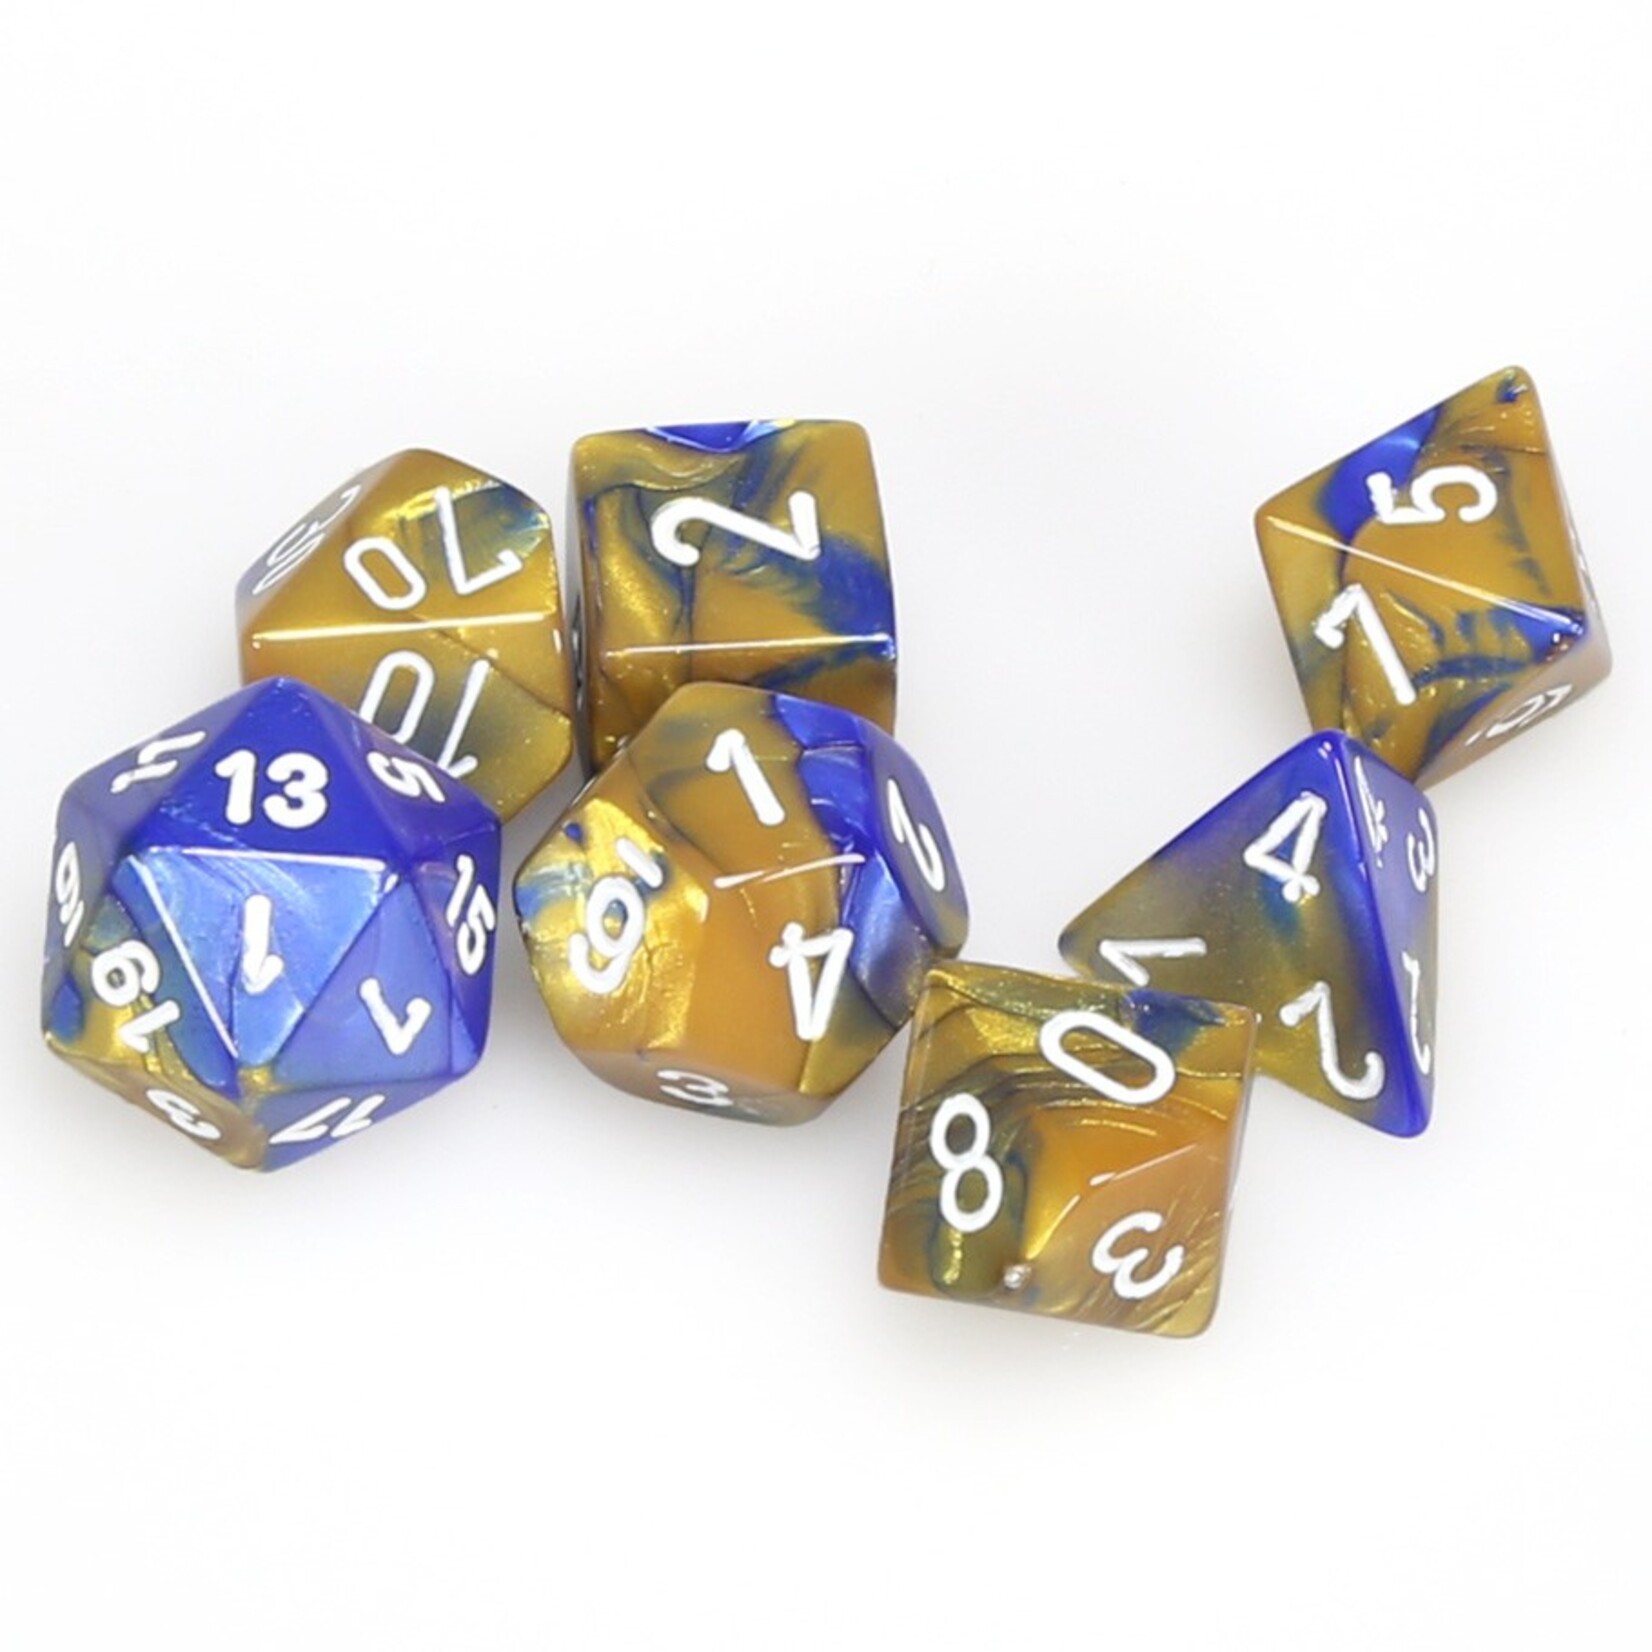 Chessex Chessex Gemini Blue / Gold with White Polyhedral 7 die set